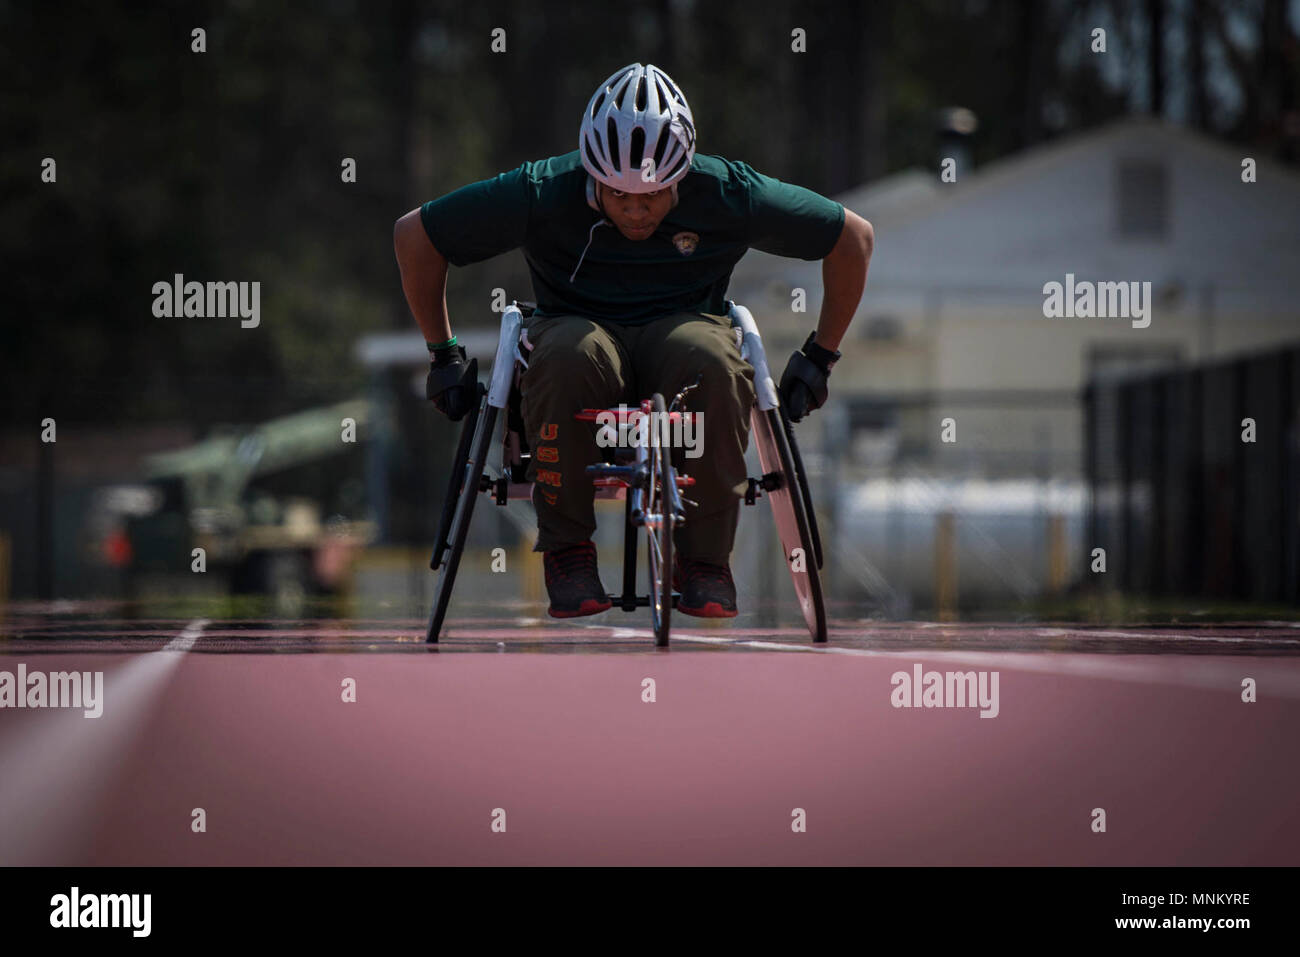 U.S. Marine Corps Cpl. Oscar Jordan practices wheelchair racing during a 2018 Marine Corps Trials track and field practice at Marine Corps Base Camp Lejeune, N.C., March 16, 2018. The Marine Corps Trials promotes recovery and rehabilitation through adaptive sport participation and develops camaraderie among recovering service members (RSMs) and veterans. It is an opportunity for RSMs to demonstrate their achievements and serves as the primary venue to select Marine Corps participants for the DoD Warrior Games. Stock Photo